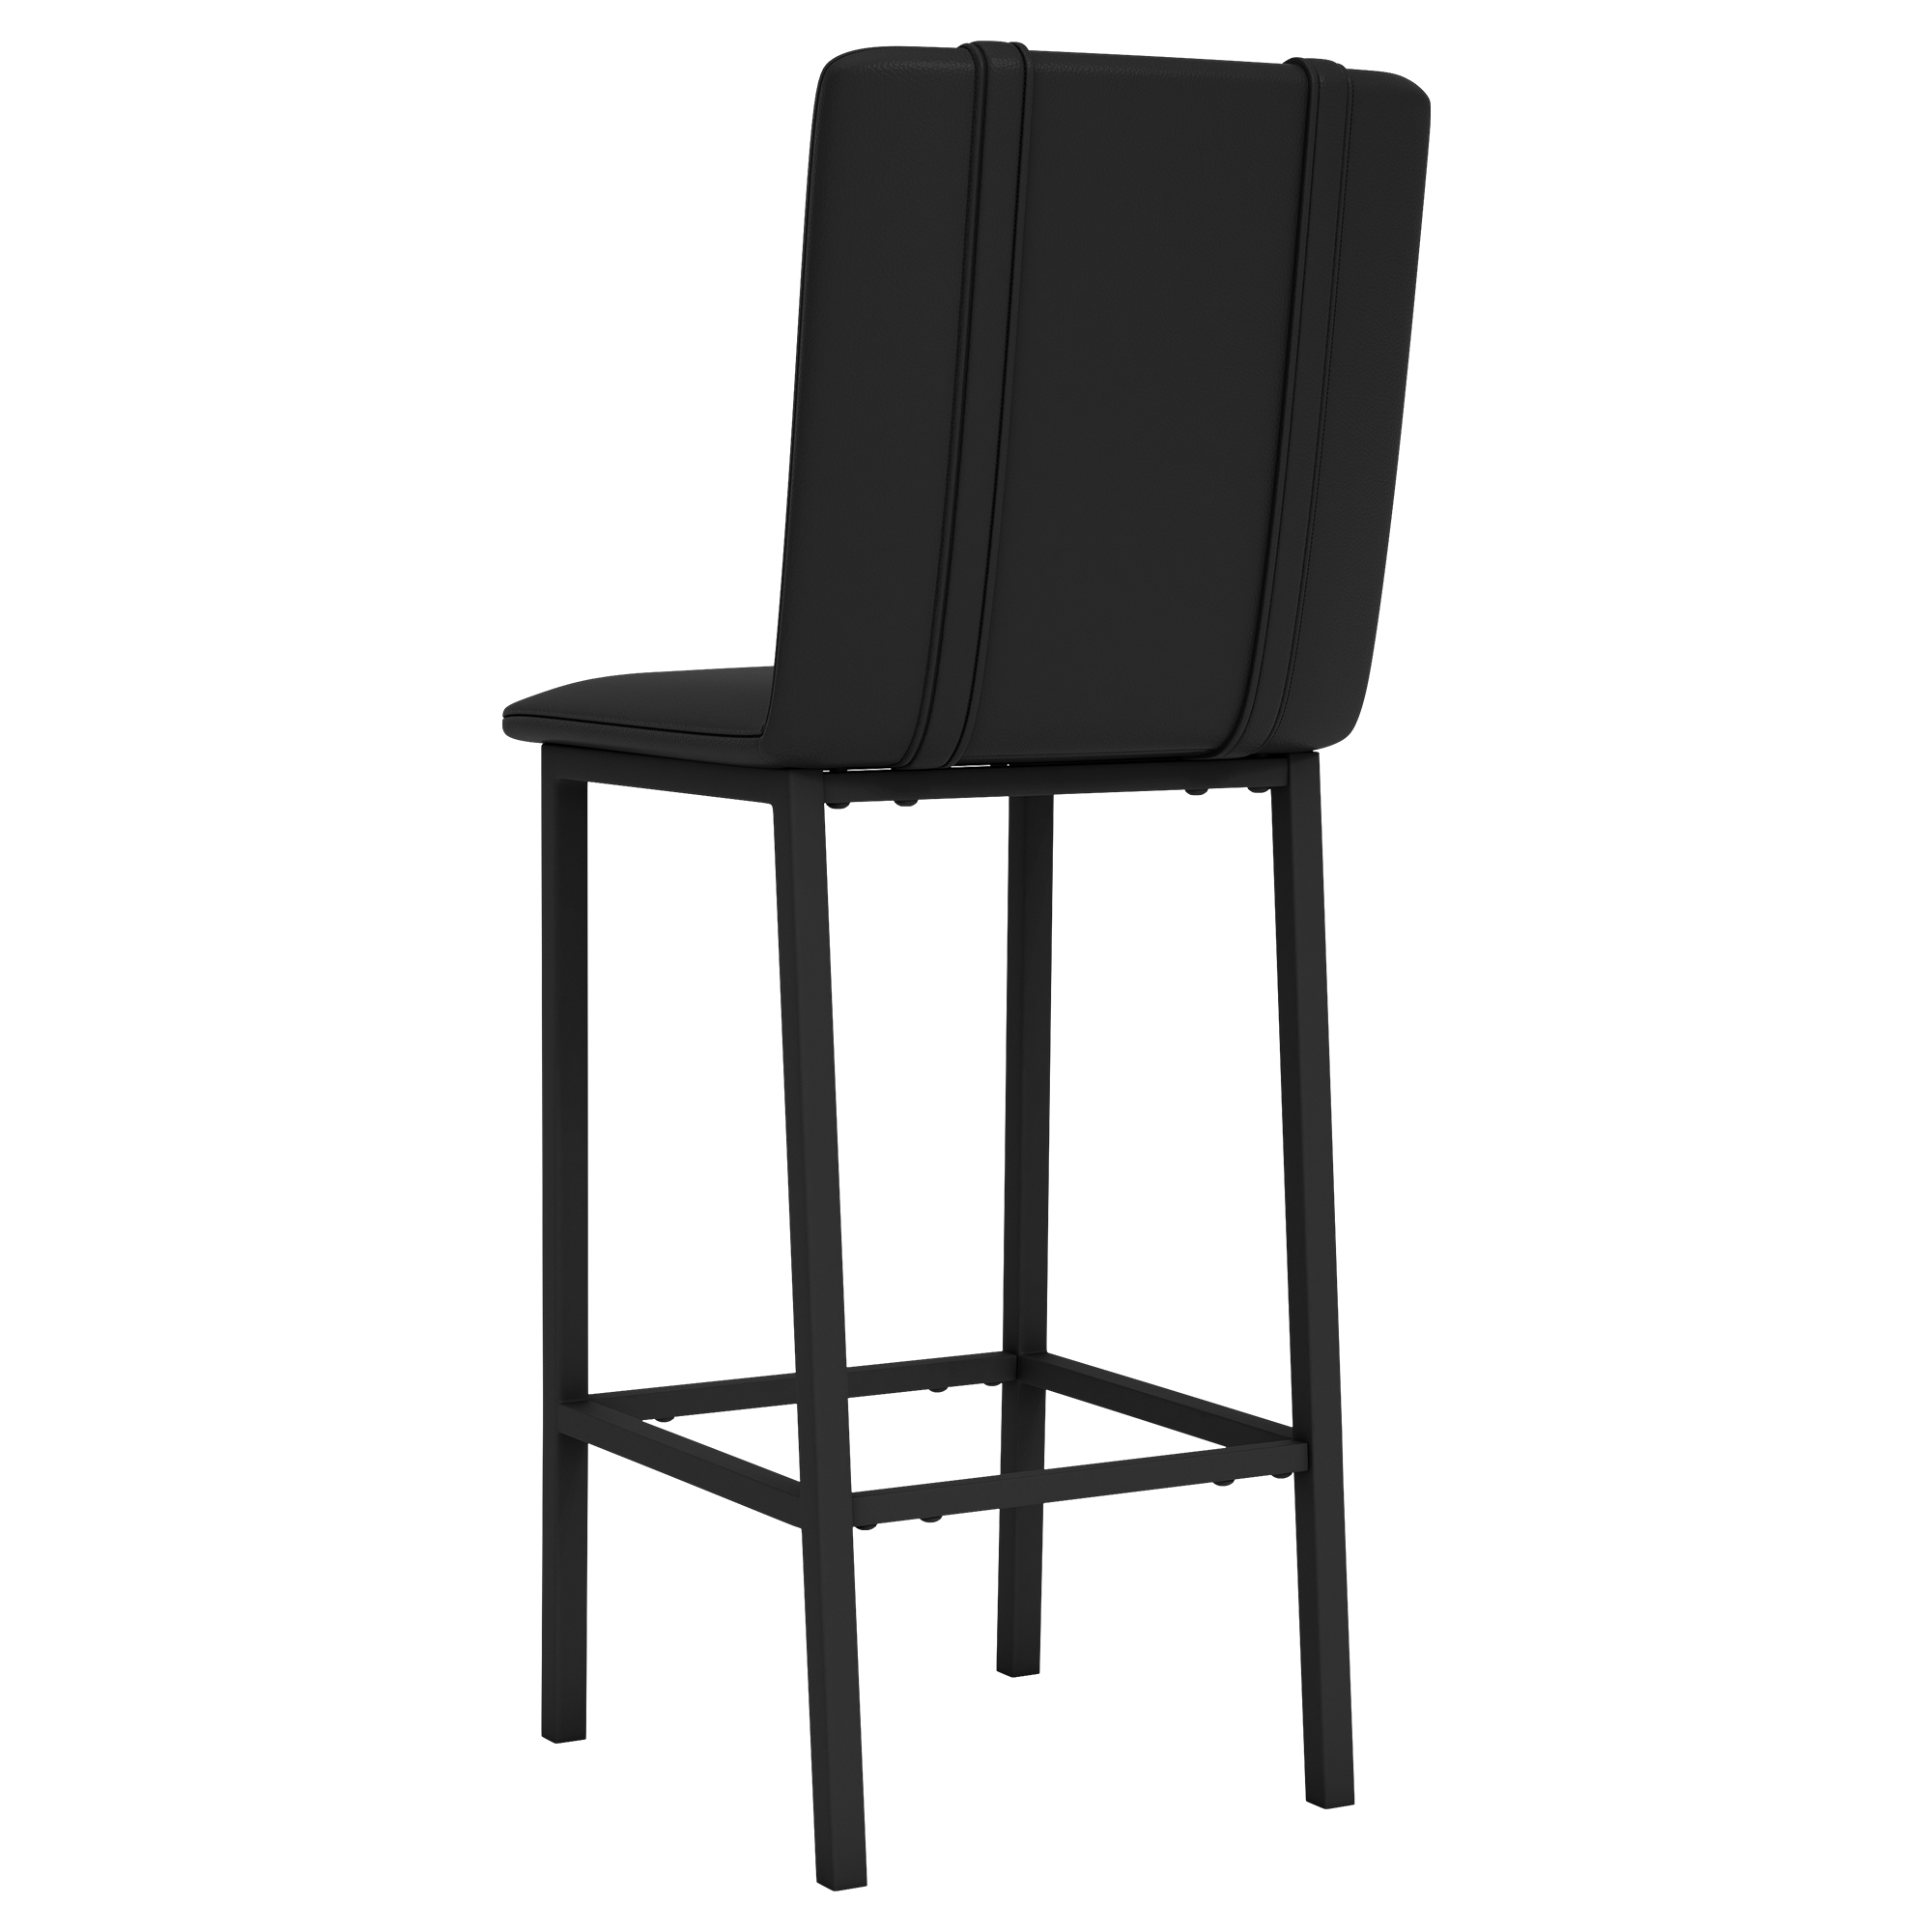 Bar Stool 500 with Atlanta Braves Cooperstown Primary Set of 2